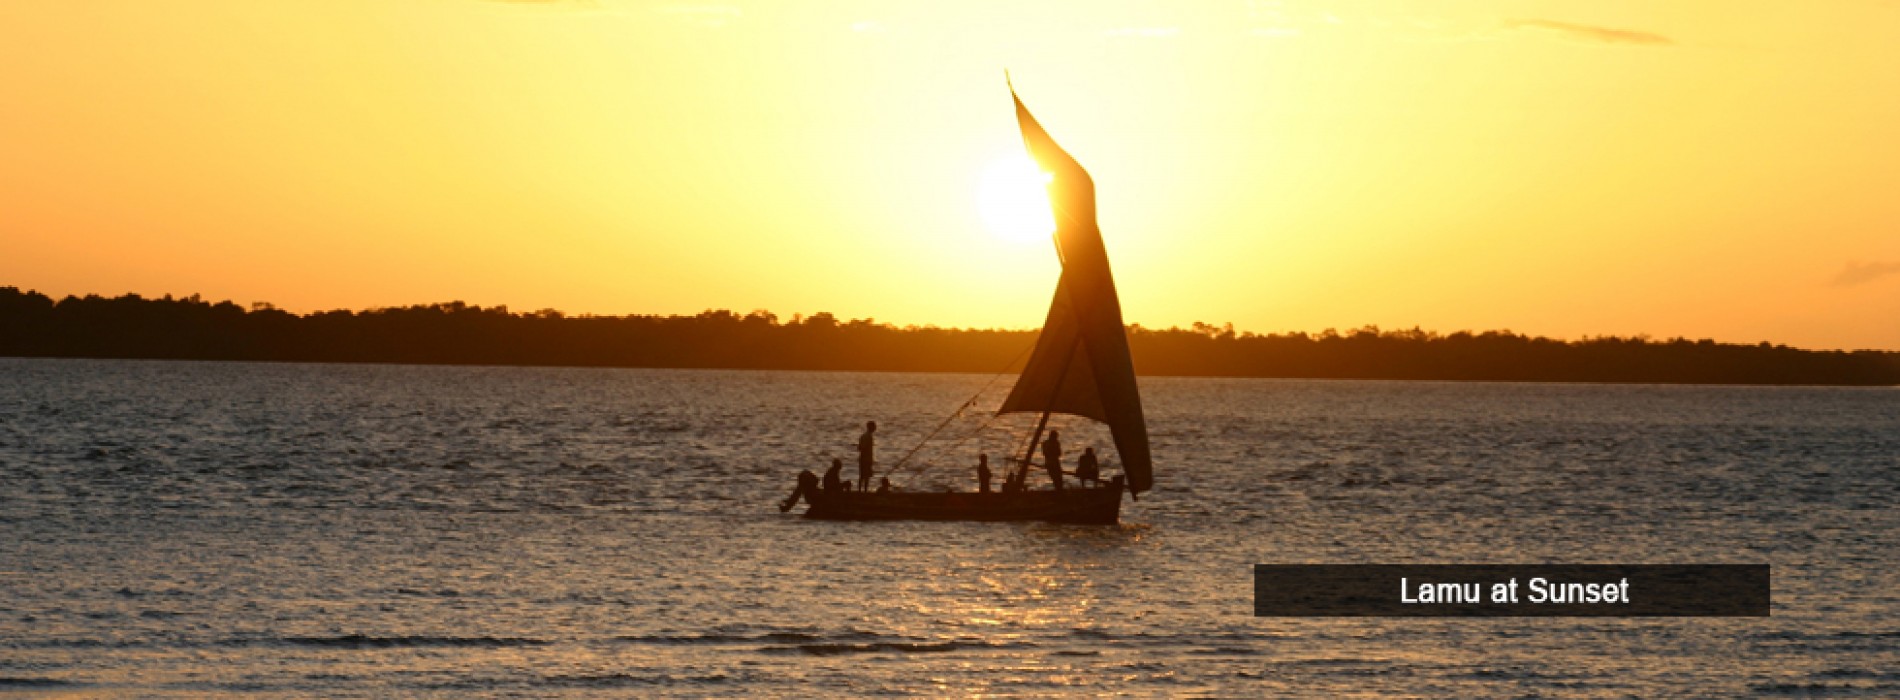 6 reasons why Lamu should be on your bucket list for 2016